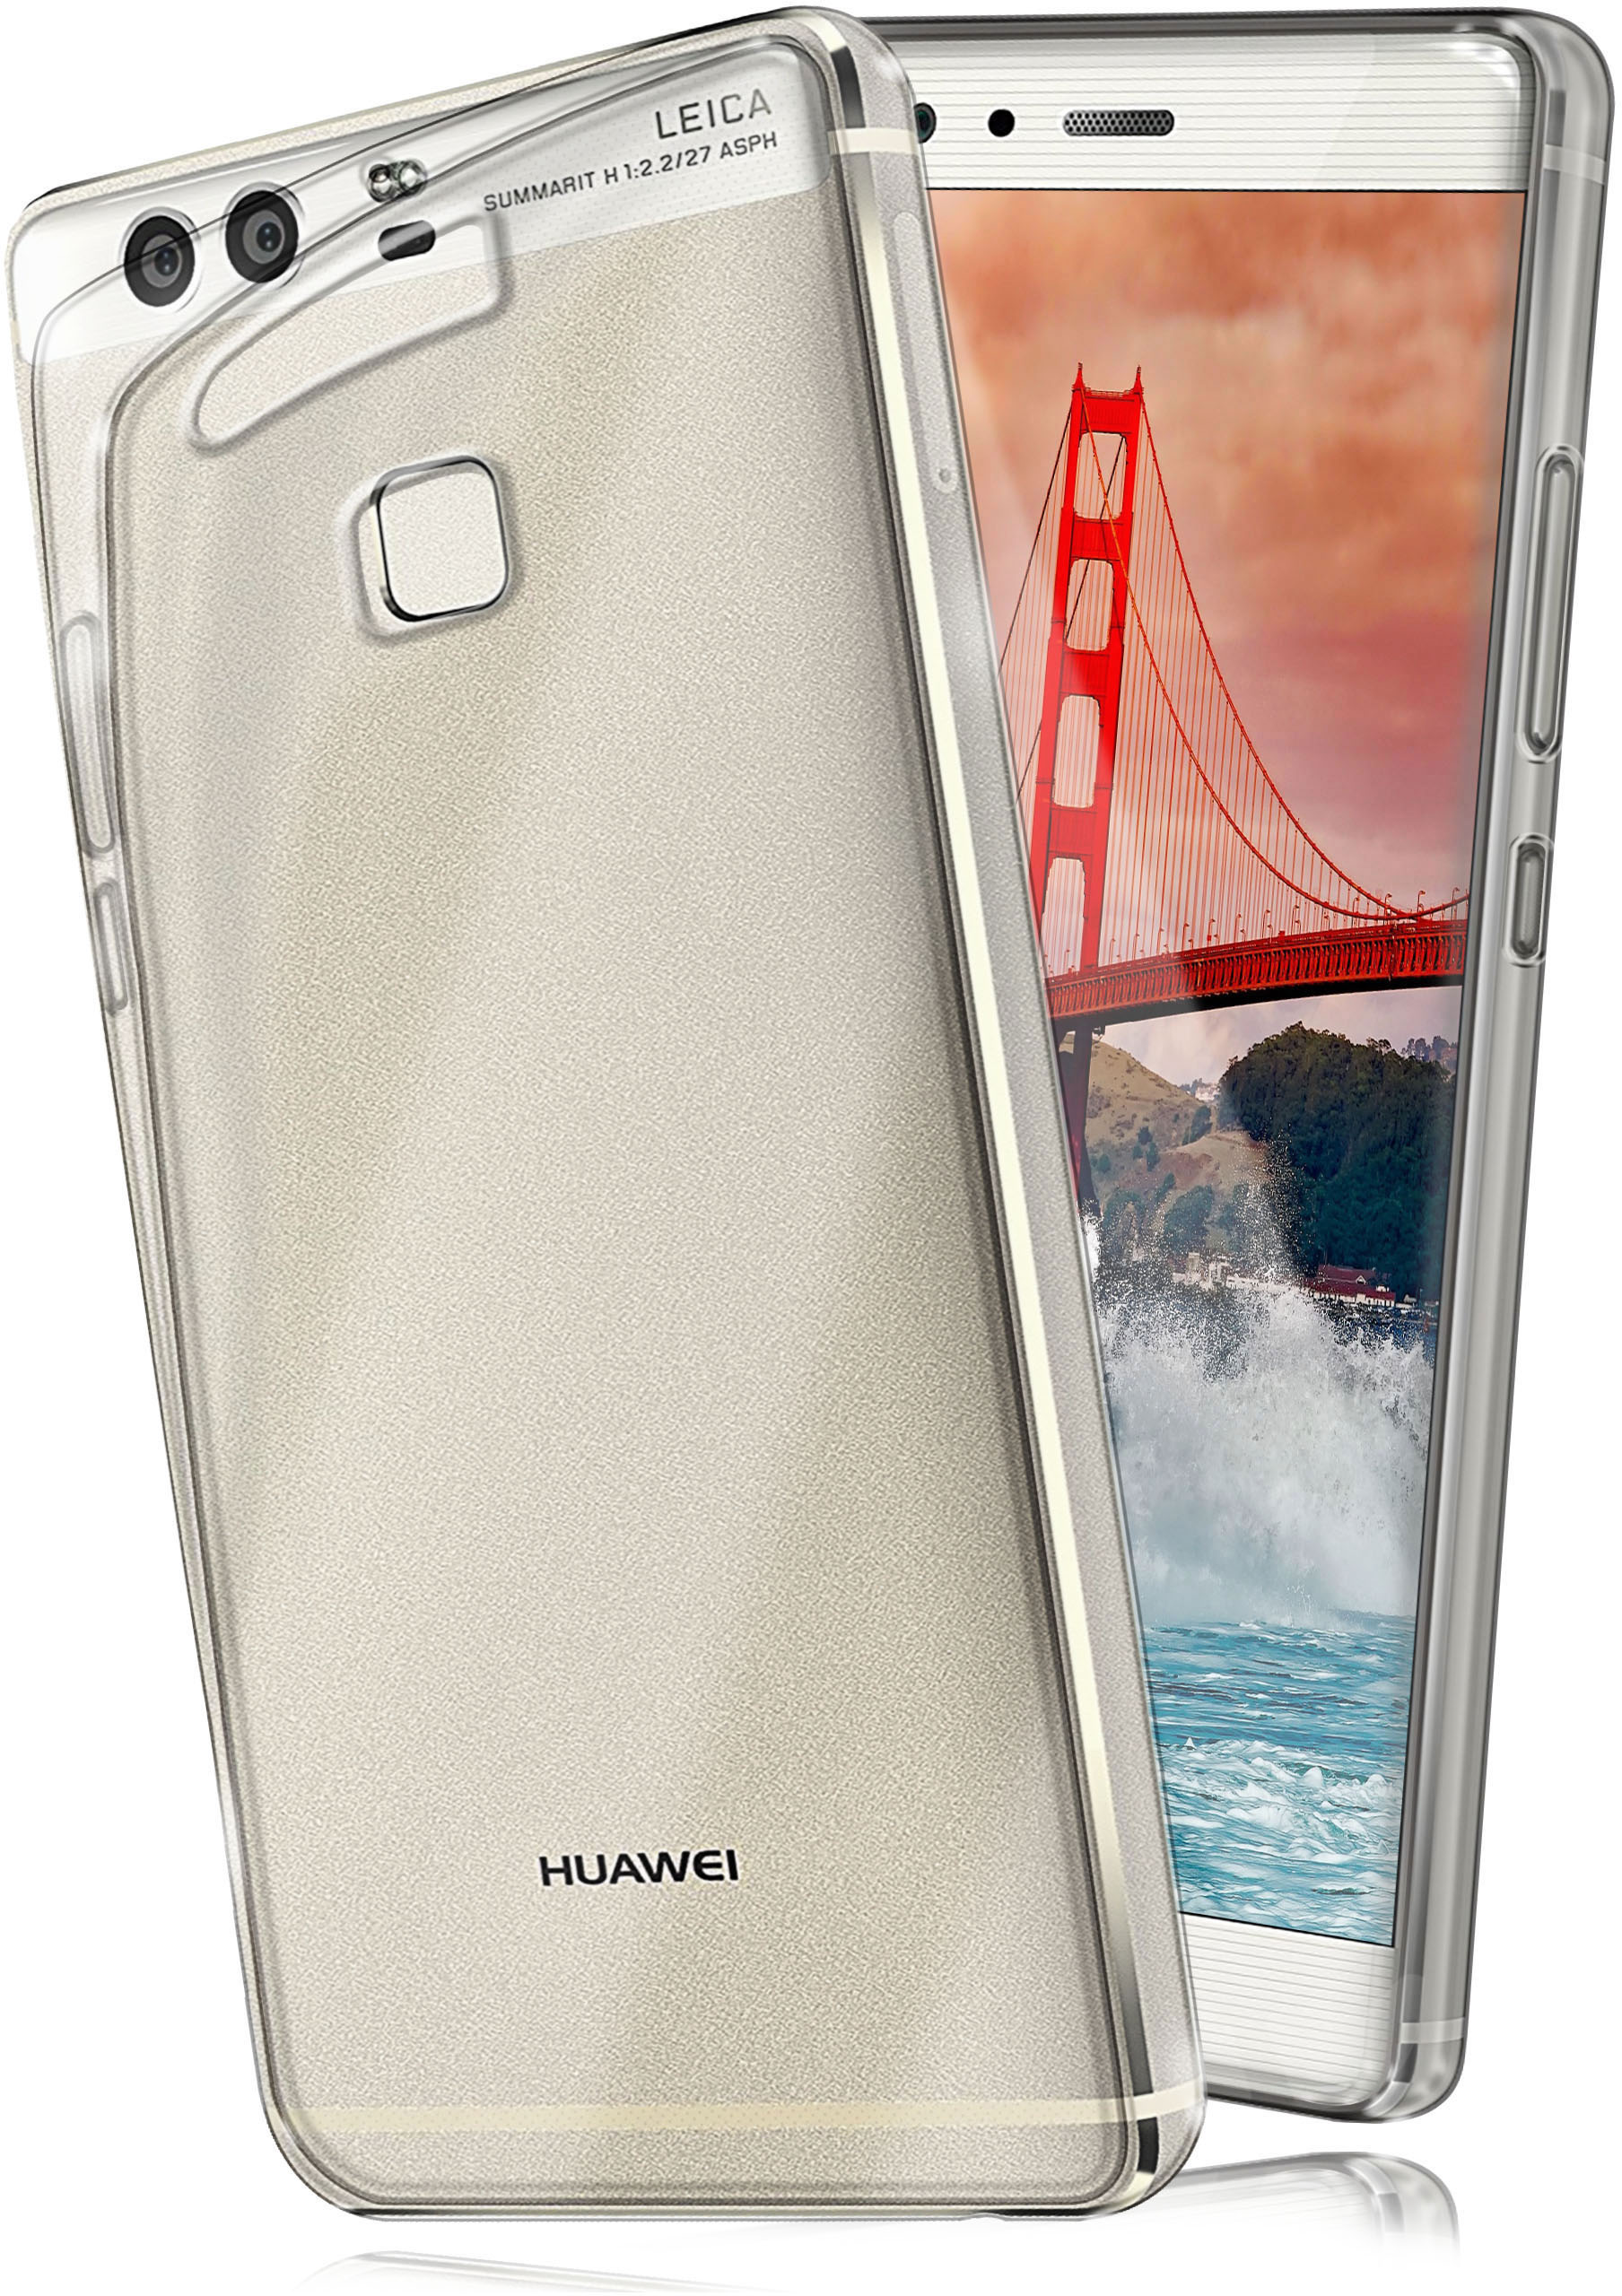 MOEX Aero Huawei, P9, Backcover, Case, Crystal-Clear